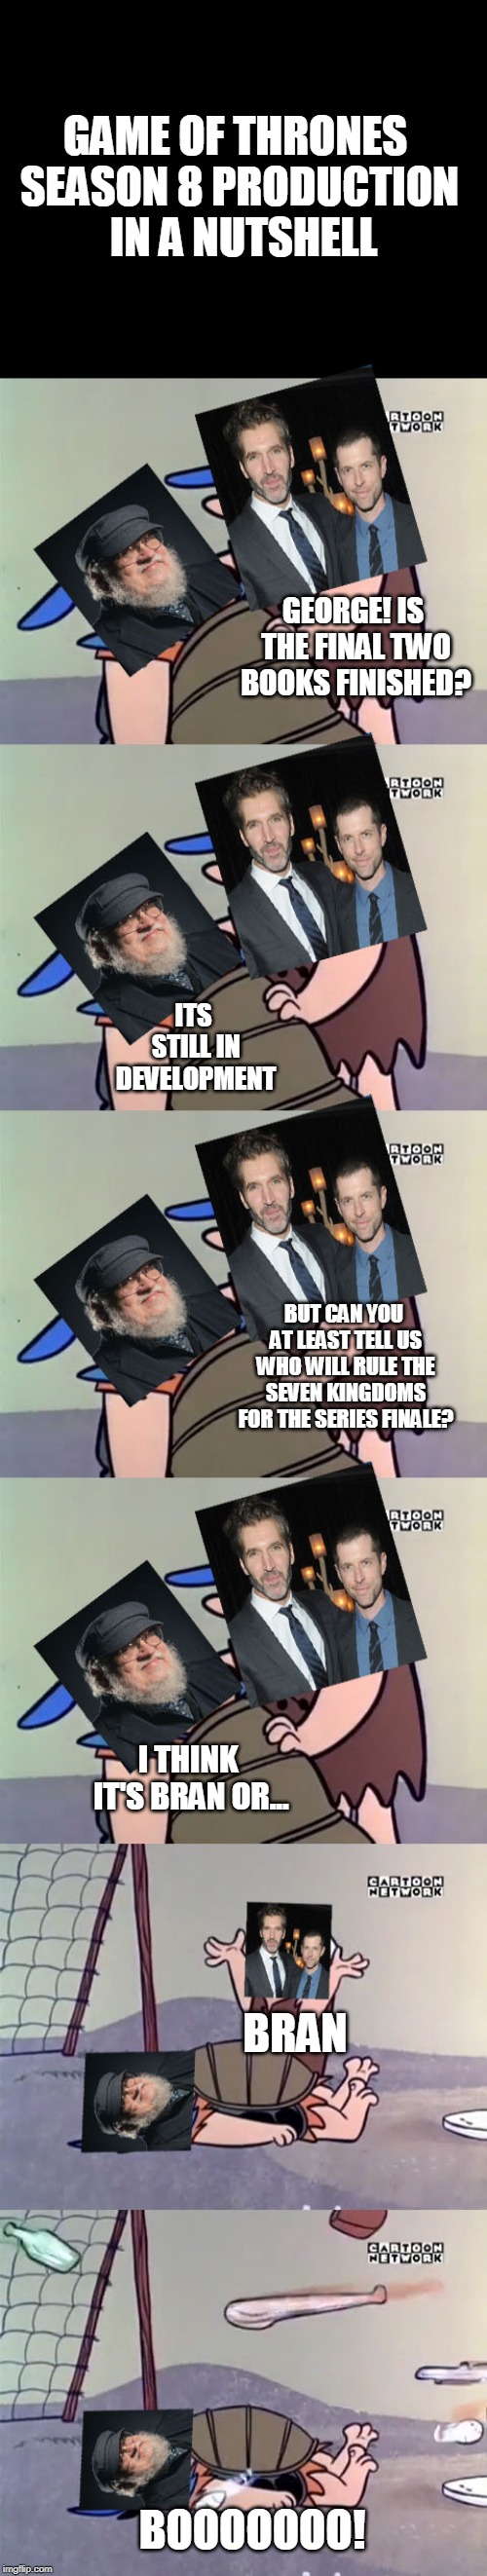 Game of thrones season 8 production in a nutshell | GAME OF THRONES SEASON 8 PRODUCTION  IN A NUTSHELL; GEORGE! IS THE FINAL TWO BOOKS FINISHED? ITS STILL IN DEVELOPMENT; BUT CAN YOU AT LEAST TELL US WHO WILL RULE THE SEVEN KINGDOMS FOR THE SERIES FINALE? I THINK IT'S BRAN OR... BRAN; BOOOOOOO! | image tagged in game of thrones,flinstones,season 8,memes | made w/ Imgflip meme maker